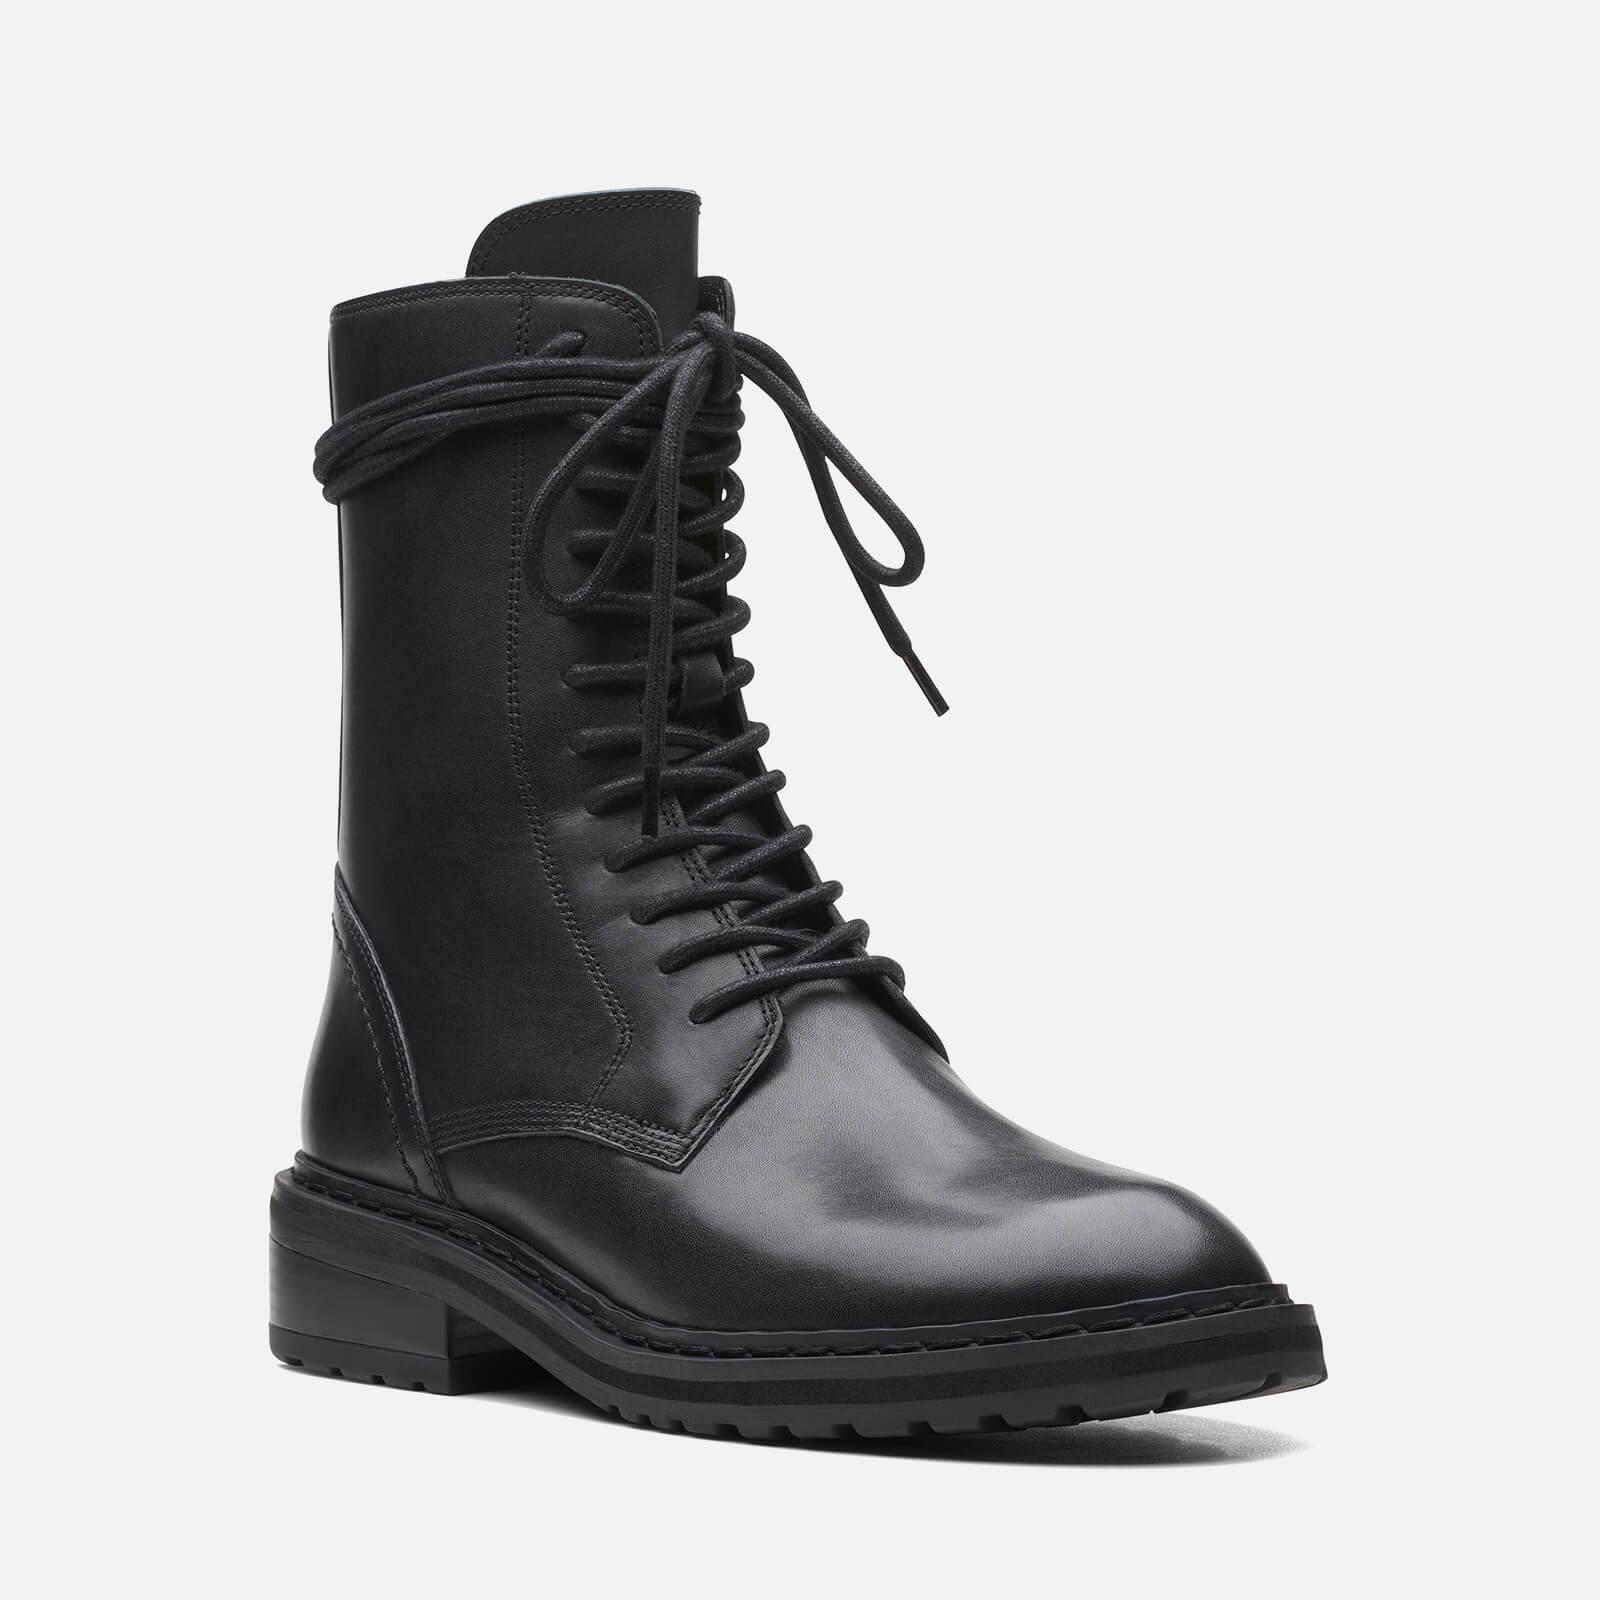 Clarks Tilham Lace Up Leather Boots in Black | Lyst